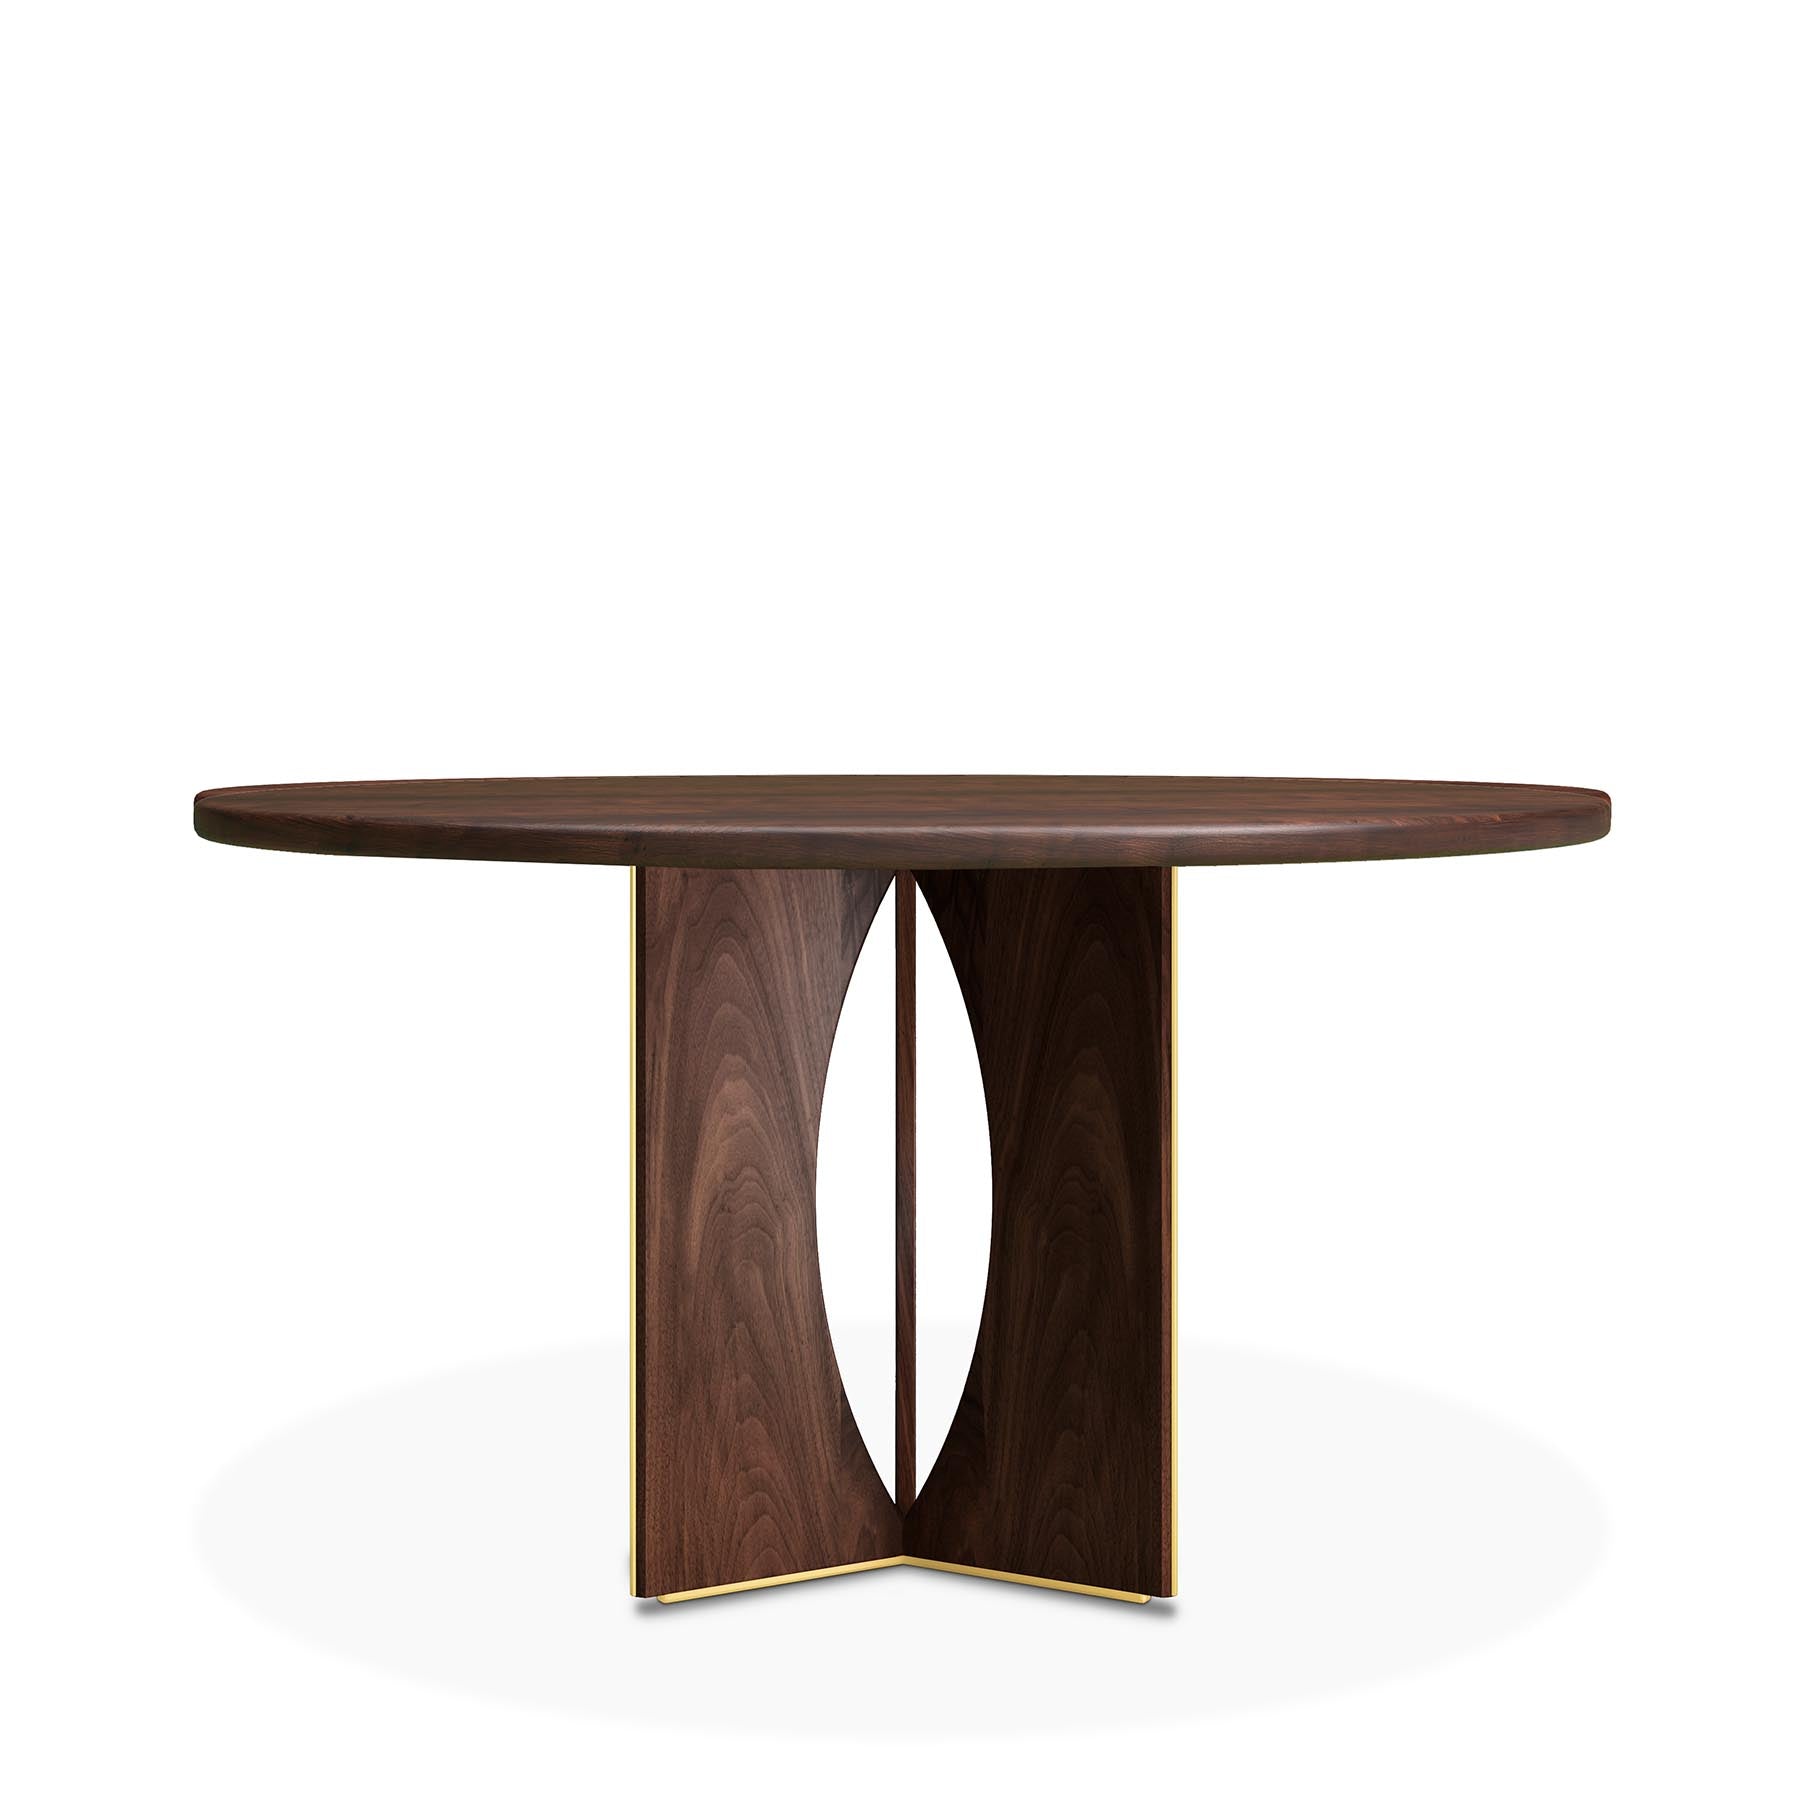 TAYLOR - ROUND DINING TABLE | Modern Furniture + Decor